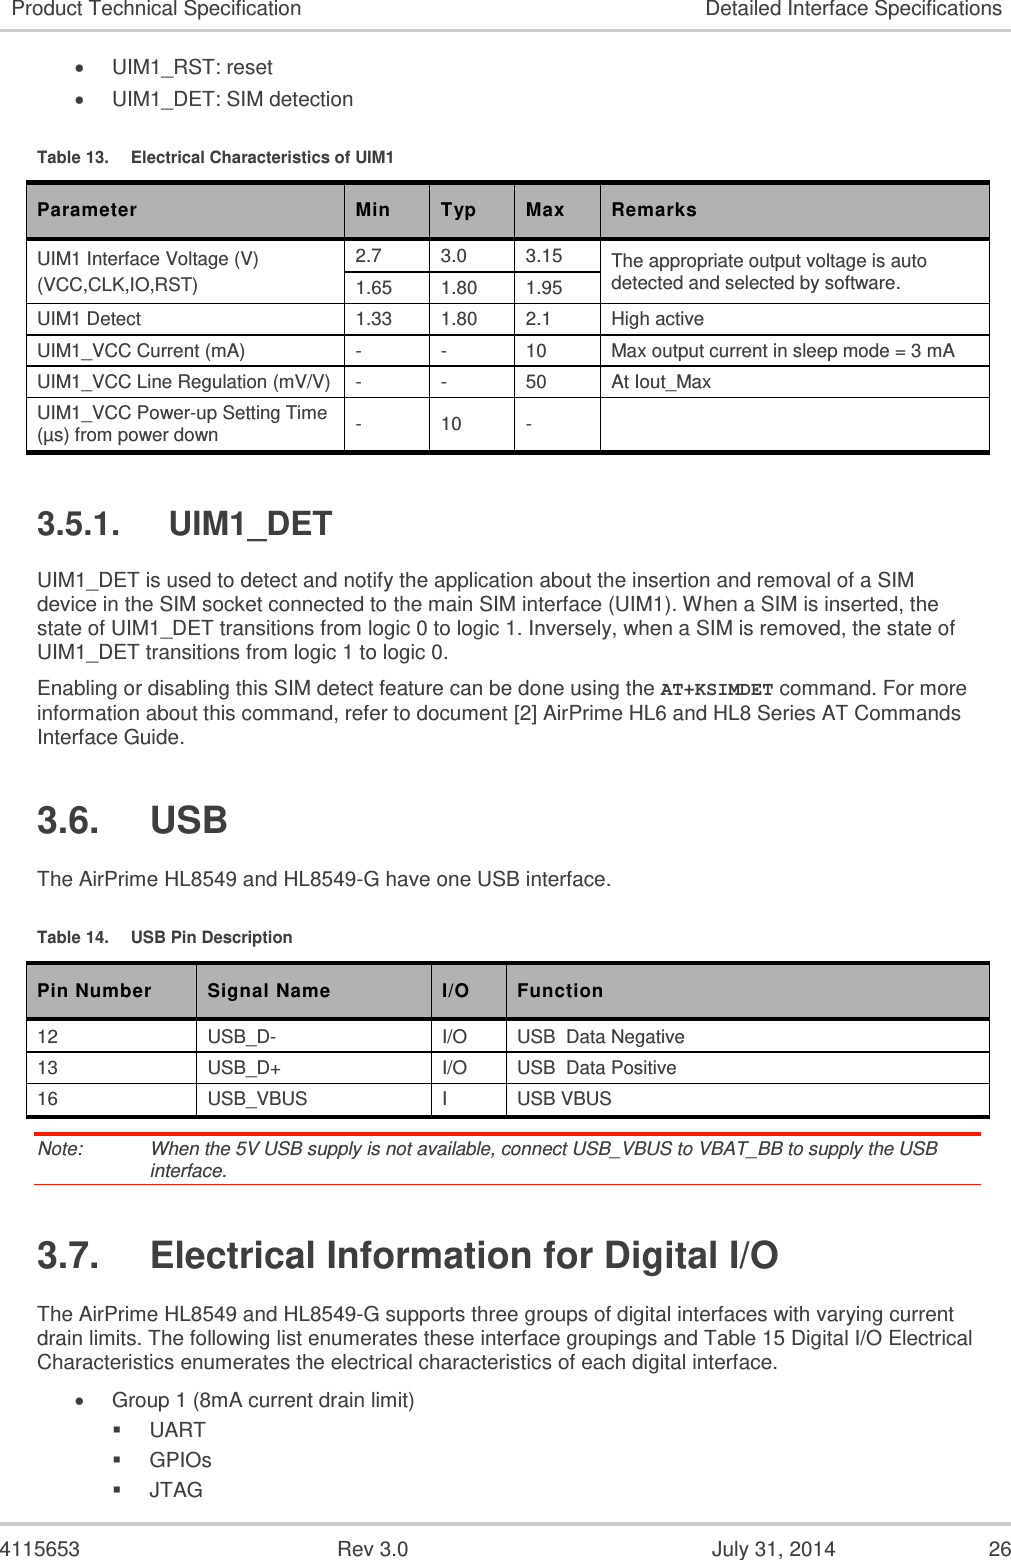  4115653  Rev 3.0  July 31, 2014  26 Product Technical Specification Detailed Interface Specifications  UIM1_RST: reset  UIM1_DET: SIM detection Table 13.  Electrical Characteristics of UIM1 Parameter Min Typ Max Remarks UIM1 Interface Voltage (V) (VCC,CLK,IO,RST) 2.7 3.0 3.15 The appropriate output voltage is auto detected and selected by software. 1.65 1.80 1.95 UIM1 Detect 1.33 1.80 2.1 High active UIM1_VCC Current (mA) - - 10 Max output current in sleep mode = 3 mA UIM1_VCC Line Regulation (mV/V) - - 50 At Iout_Max UIM1_VCC Power-up Setting Time (µs) from power down - 10 -  3.5.1.  UIM1_DET UIM1_DET is used to detect and notify the application about the insertion and removal of a SIM device in the SIM socket connected to the main SIM interface (UIM1). When a SIM is inserted, the state of UIM1_DET transitions from logic 0 to logic 1. Inversely, when a SIM is removed, the state of UIM1_DET transitions from logic 1 to logic 0. Enabling or disabling this SIM detect feature can be done using the AT+KSIMDET command. For more information about this command, refer to document [2] AirPrime HL6 and HL8 Series AT Commands Interface Guide. 3.6.  USB The AirPrime HL8549 and HL8549-G have one USB interface. Table 14.  USB Pin Description Pin Number Signal Name I/O Function 12 USB_D- I/O USB  Data Negative 13 USB_D+ I/O USB  Data Positive 16 USB_VBUS I USB VBUS Note:   When the 5V USB supply is not available, connect USB_VBUS to VBAT_BB to supply the USB interface. 3.7.  Electrical Information for Digital I/O The AirPrime HL8549 and HL8549-G supports three groups of digital interfaces with varying current drain limits. The following list enumerates these interface groupings and Table 15 Digital I/O Electrical Characteristics enumerates the electrical characteristics of each digital interface.  Group 1 (8mA current drain limit)  UART  GPIOs  JTAG 